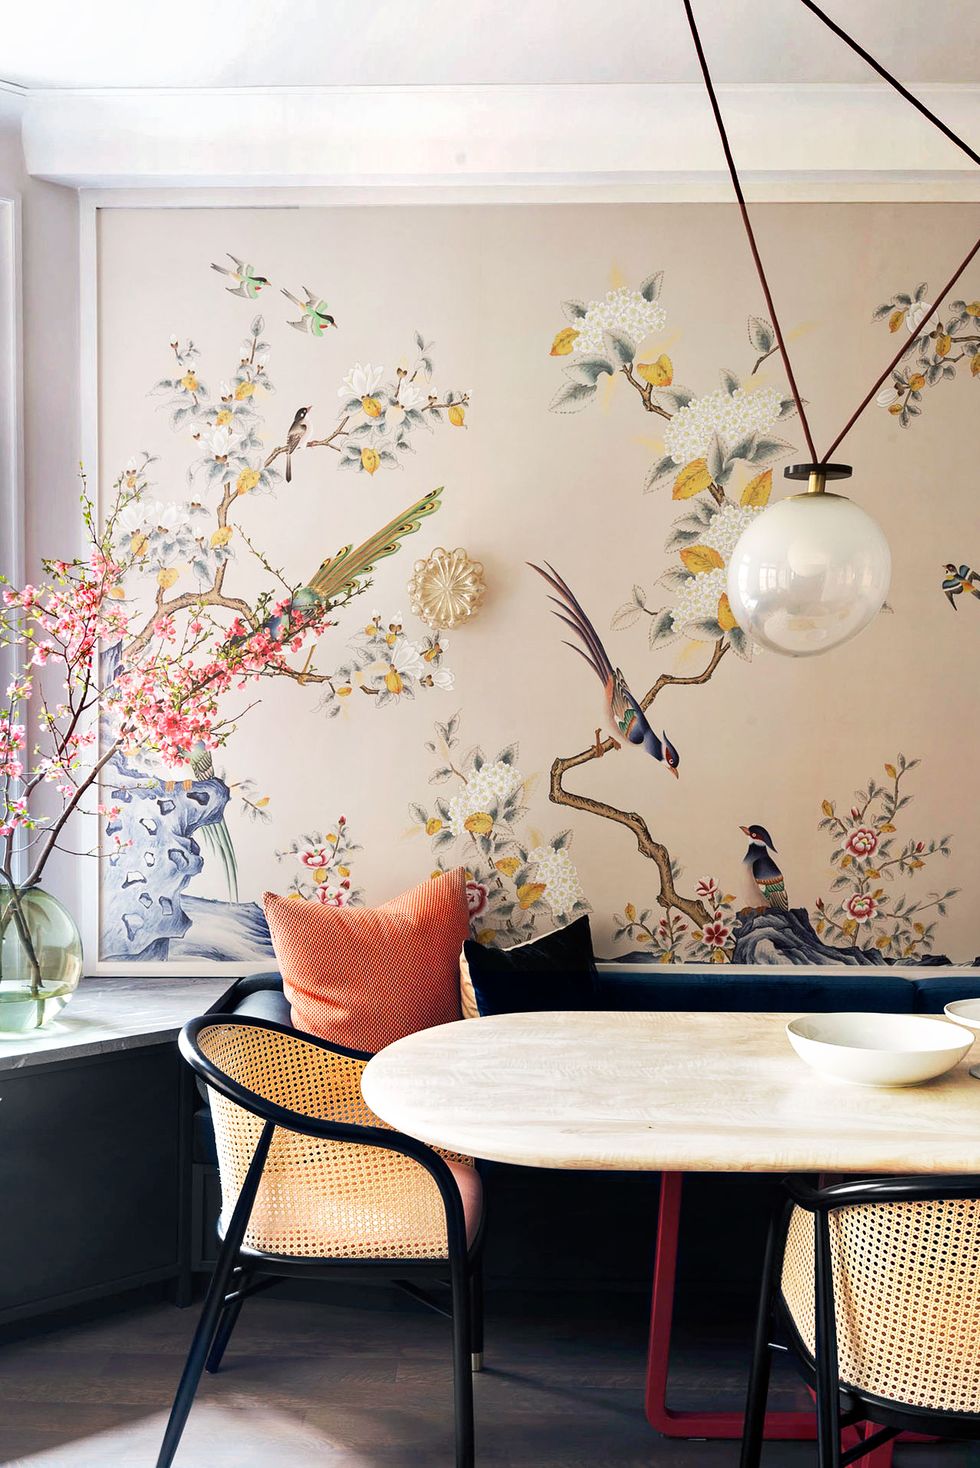 Wallpaper Installation: 10 Tips For Newbies! - Driven by Decor